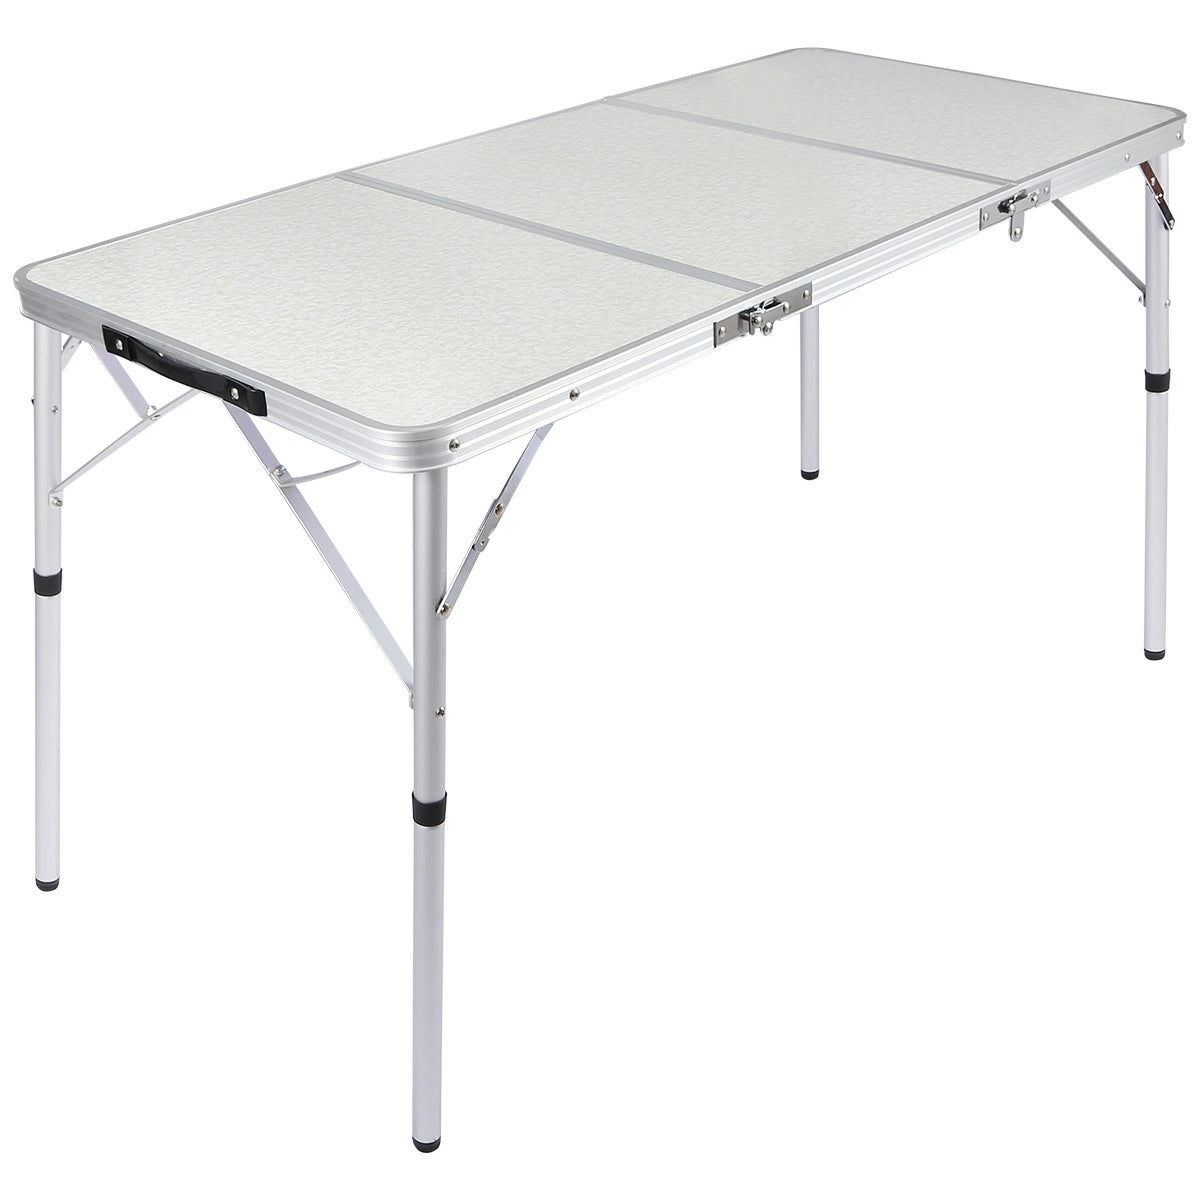 Portable Tri-Fold Aluminum Camping Table with Adjustable Heights, 4ft/6ft